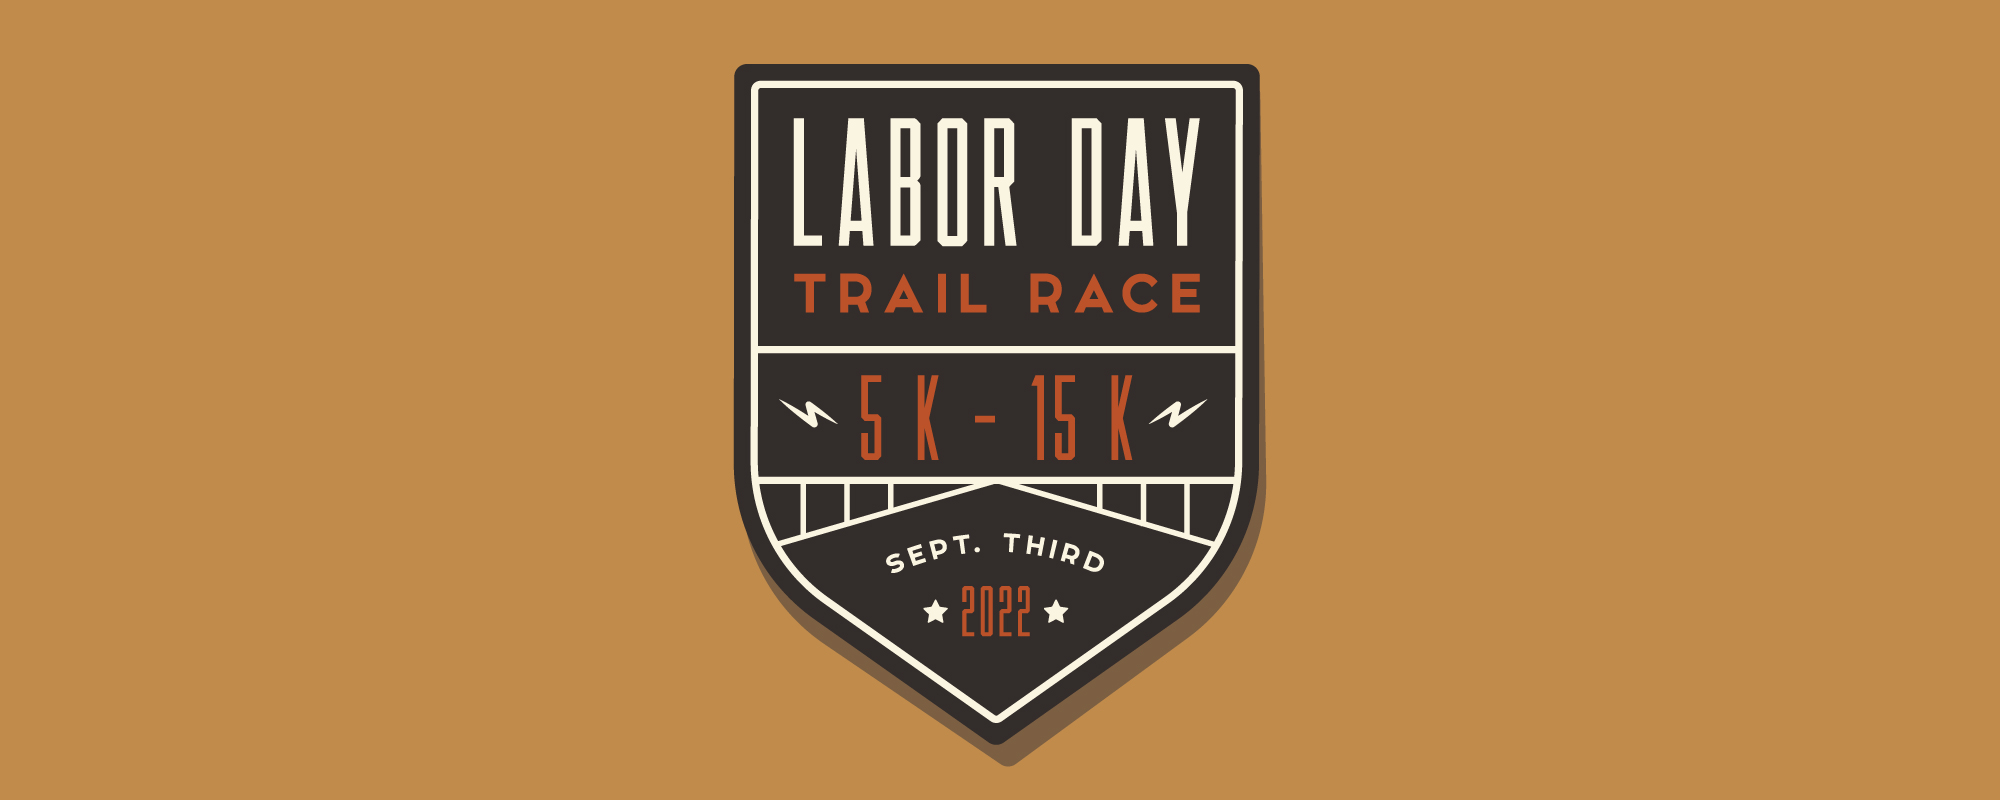 2022 Labor Day Trail Race